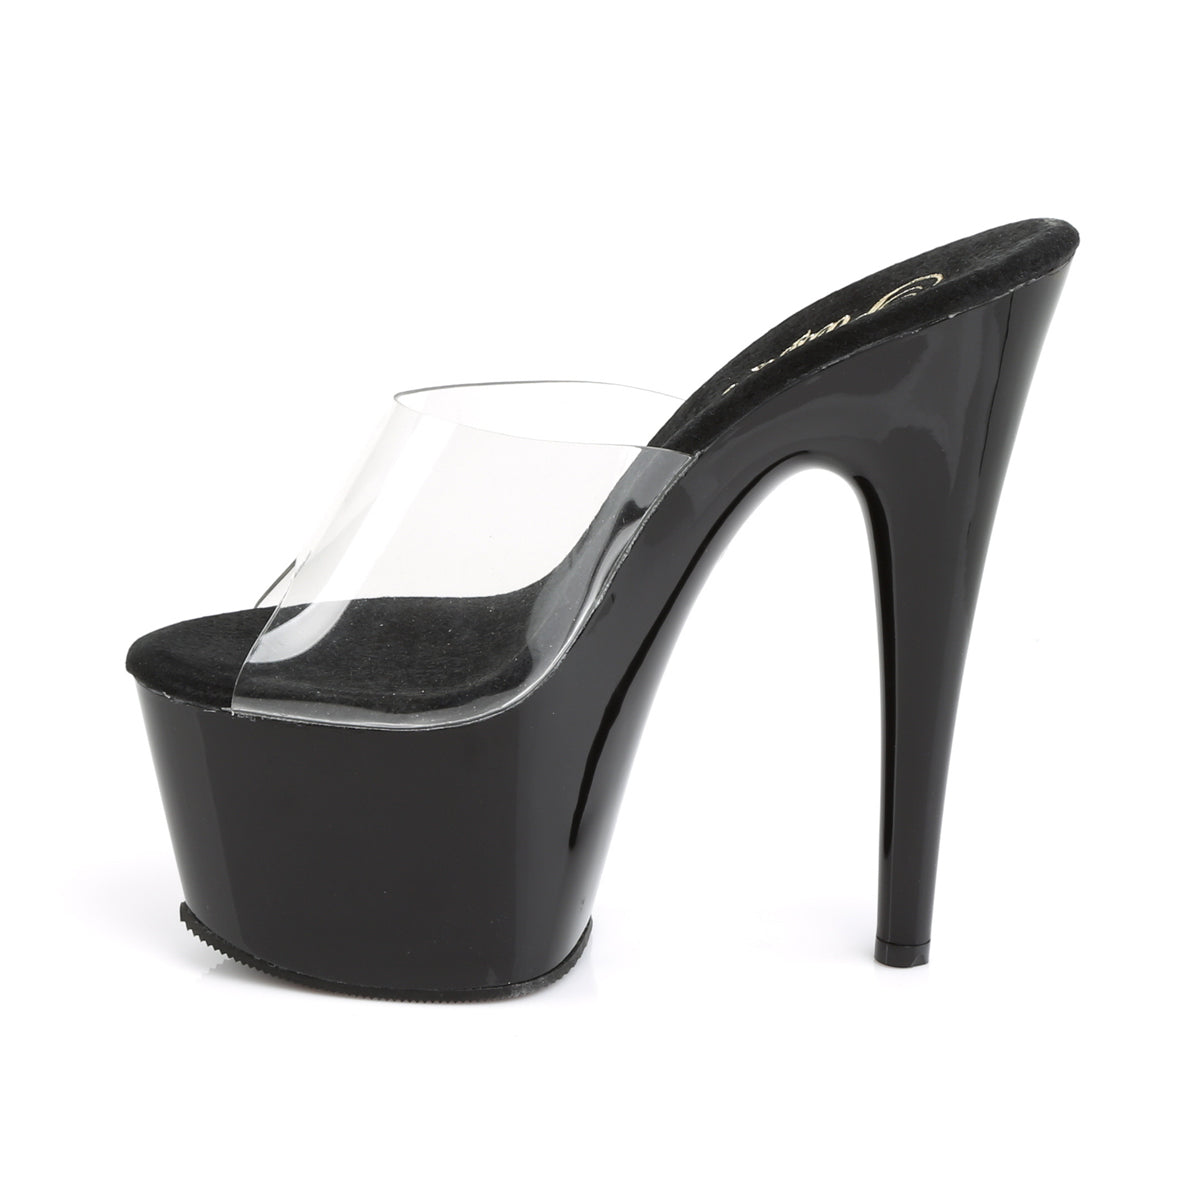 ADORE-701 / C / B 7 "PLEASER FAST DELIVERY 24-48h 